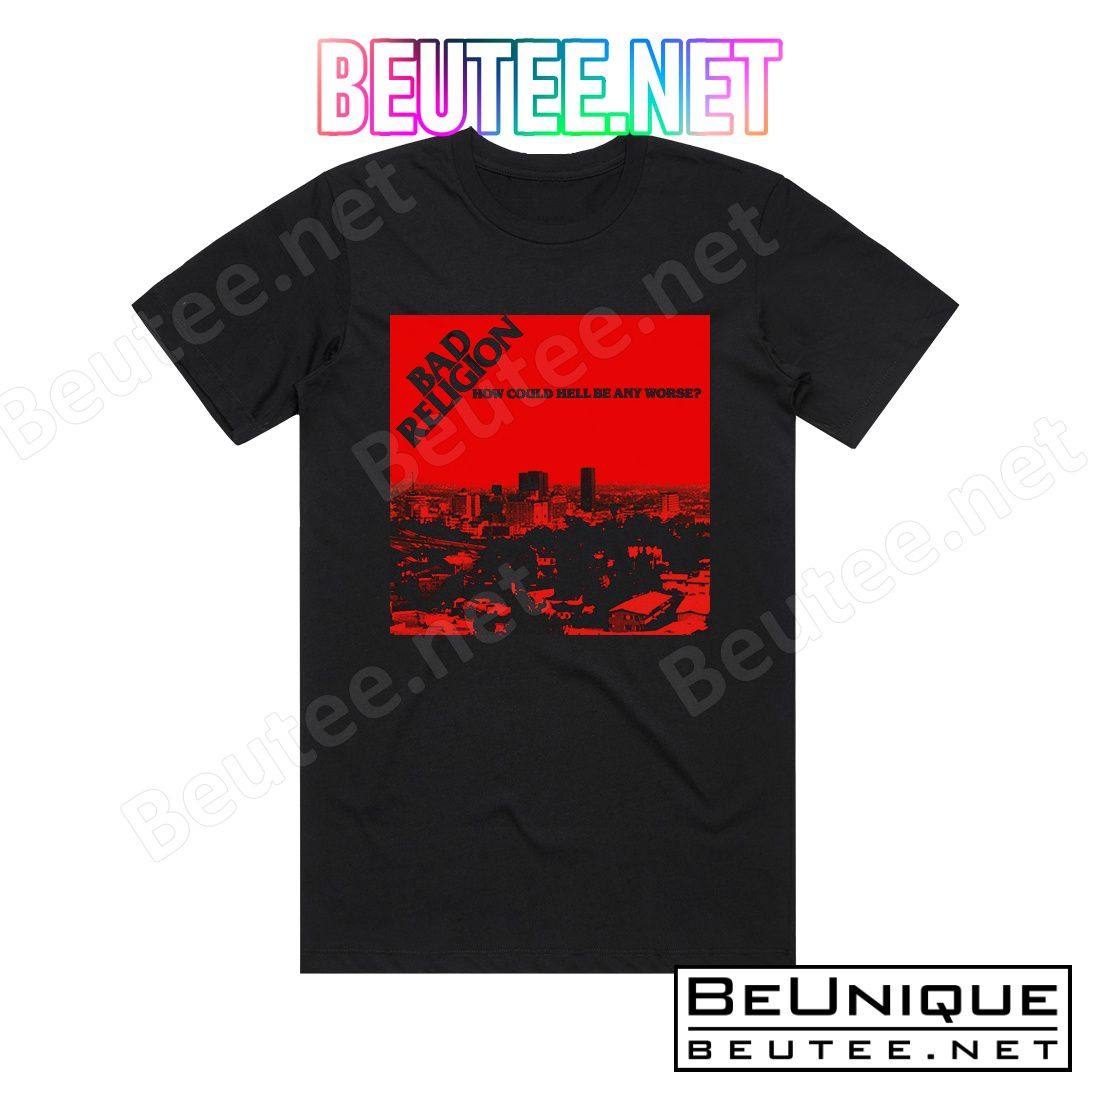 Bad Religion How Could Hell Be Any Worse 1 Album Cover T-Shirt